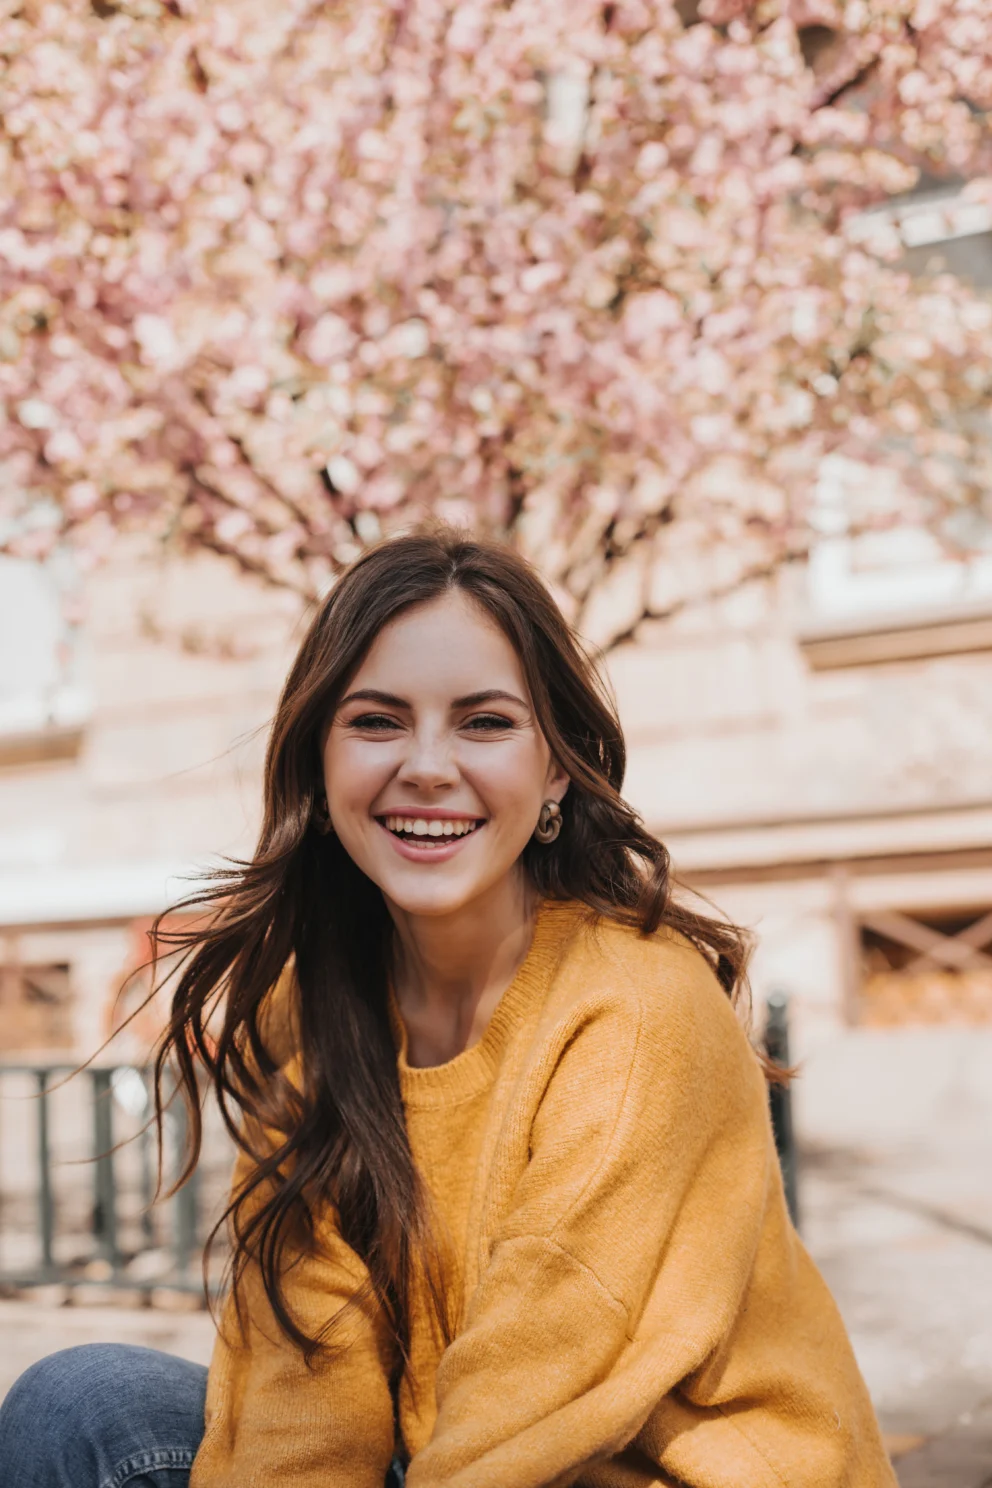 cheerful-girl-cashmere-sweater-laughs-against-backdrop-blossoming-sakura-portrait-woman-yellow-hoodie-city-spring